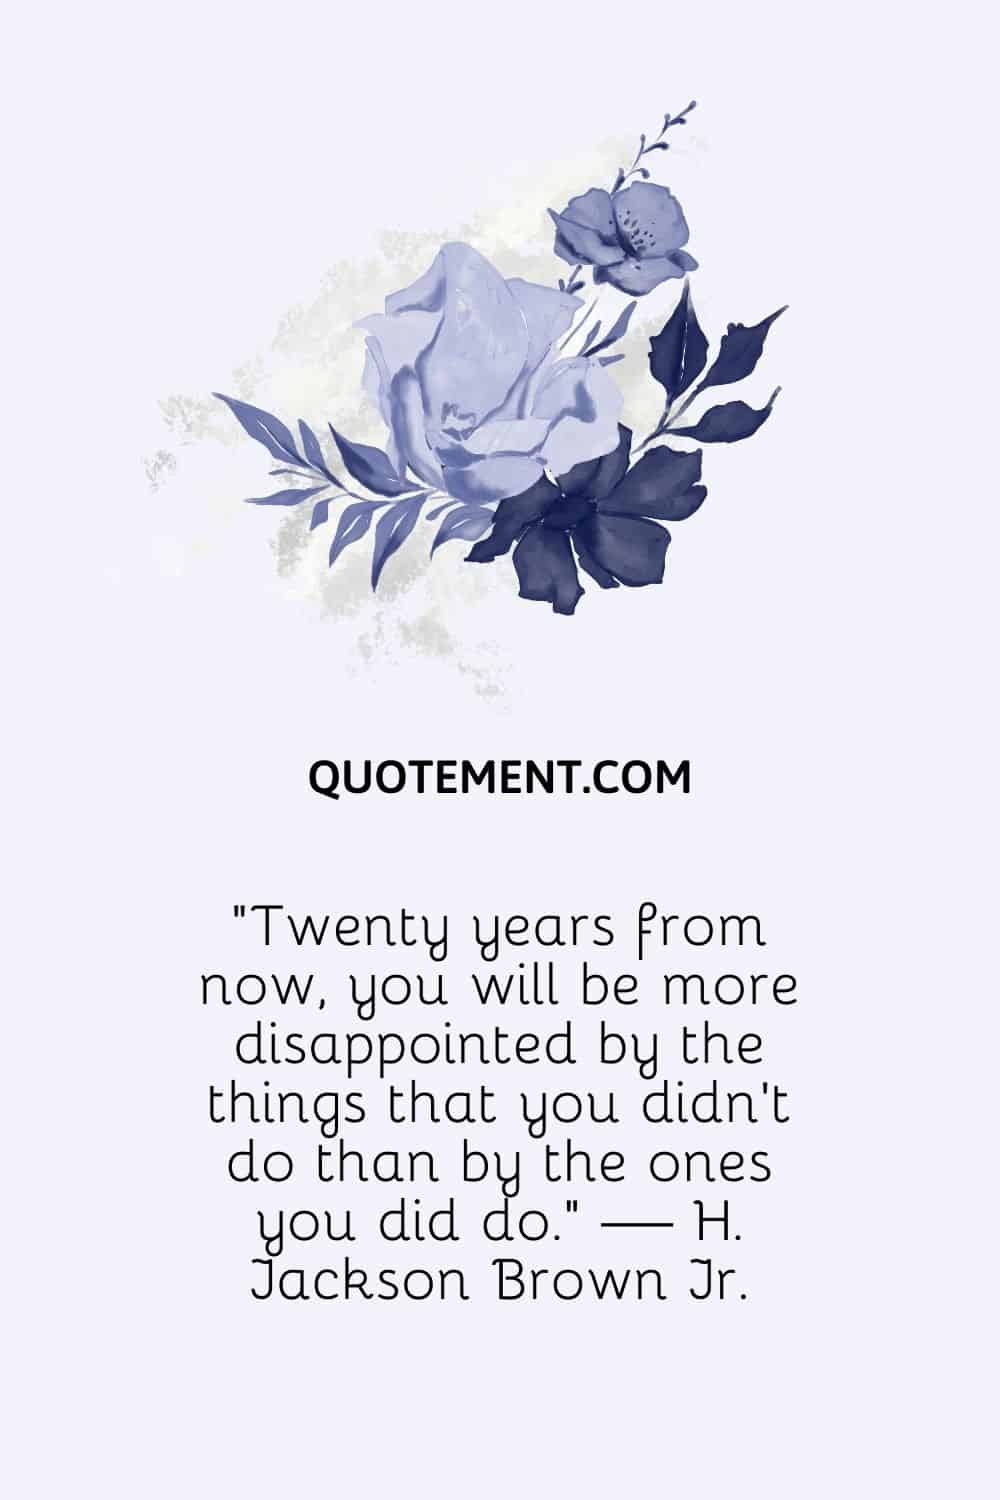 Twenty years from now, you will be more disappointed by the things that you didn’t do than by the ones you did do